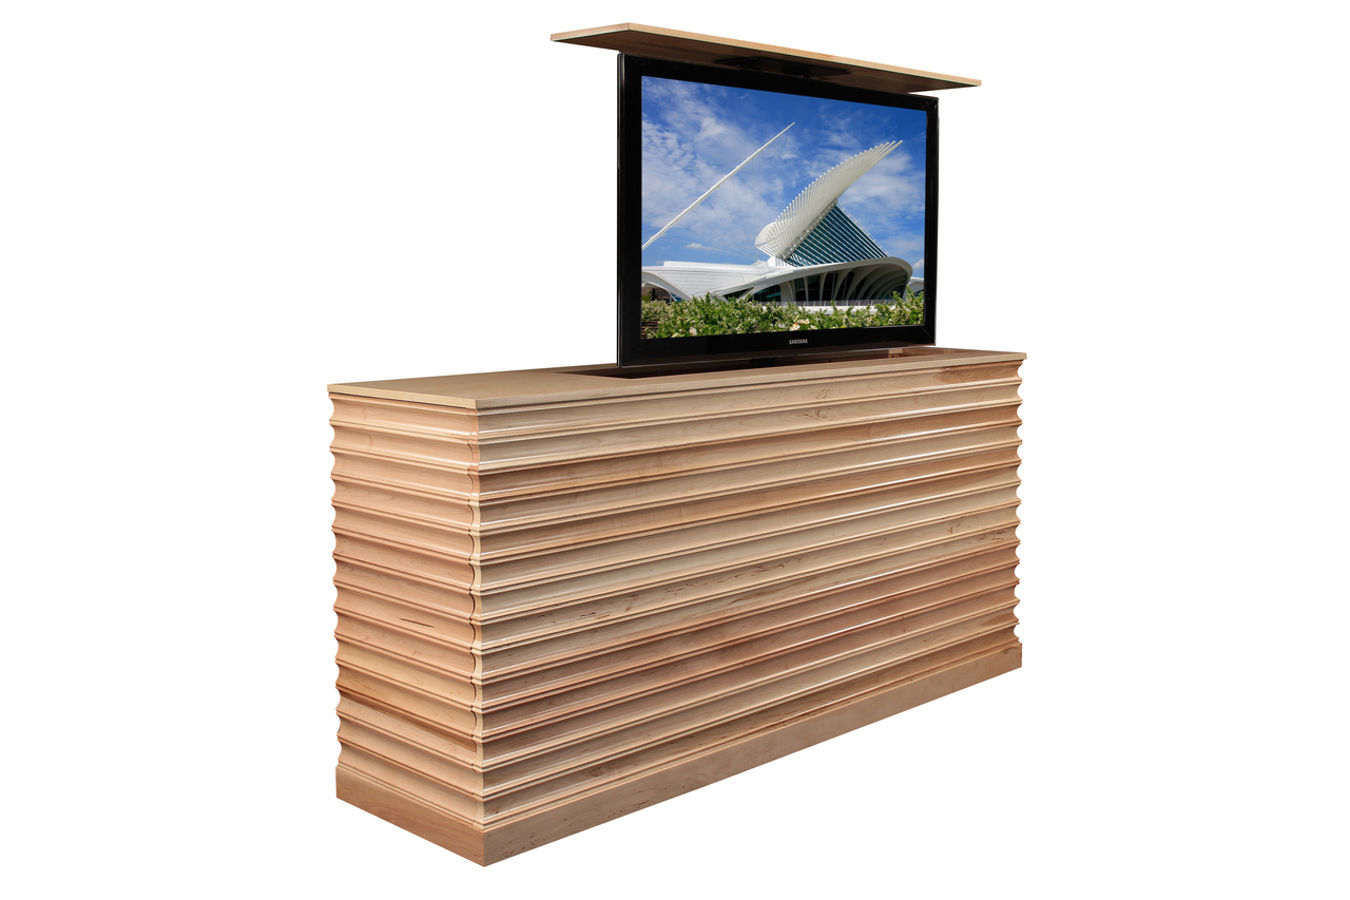 Accord Maple Tv Lift Cabinet, Outdoor Tv Lift Cabinets For Flat Screens